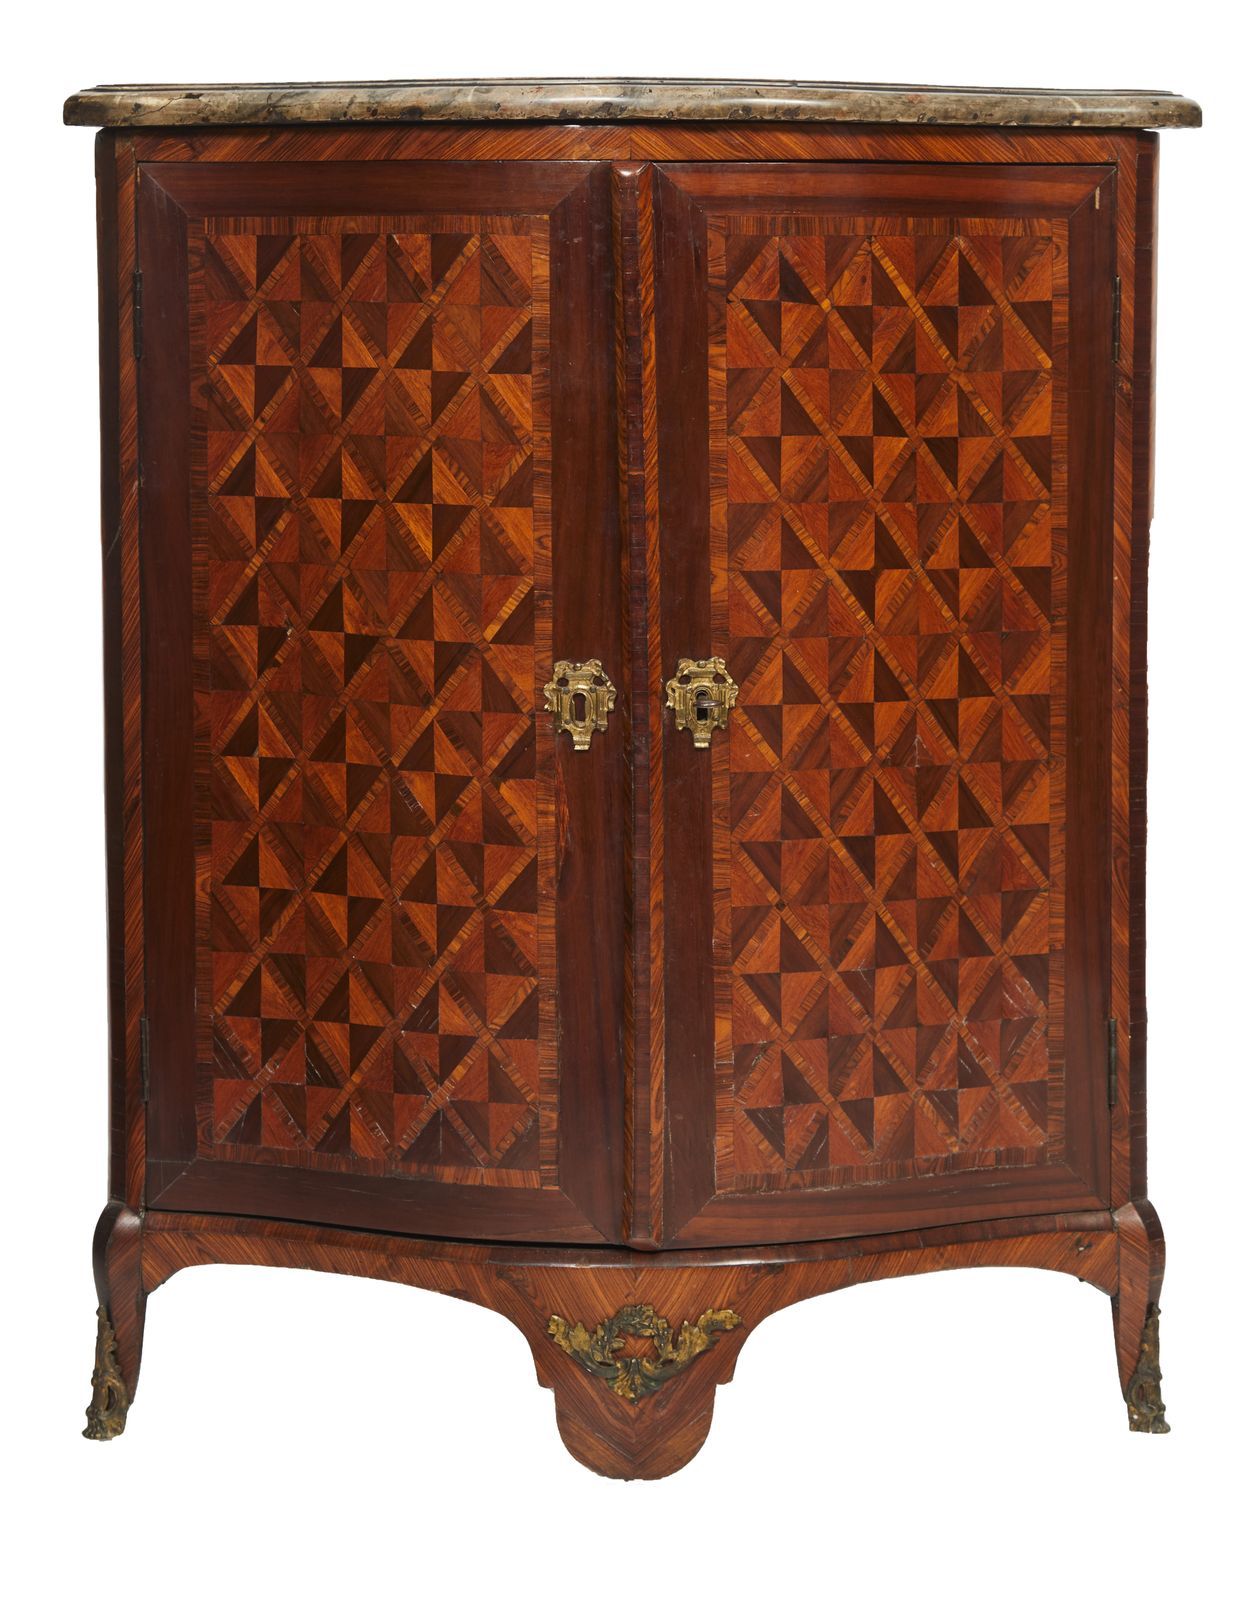 Null 408-Wooden inlaid veneer cove with diamond-shaped motifs in filleted frames&hellip;